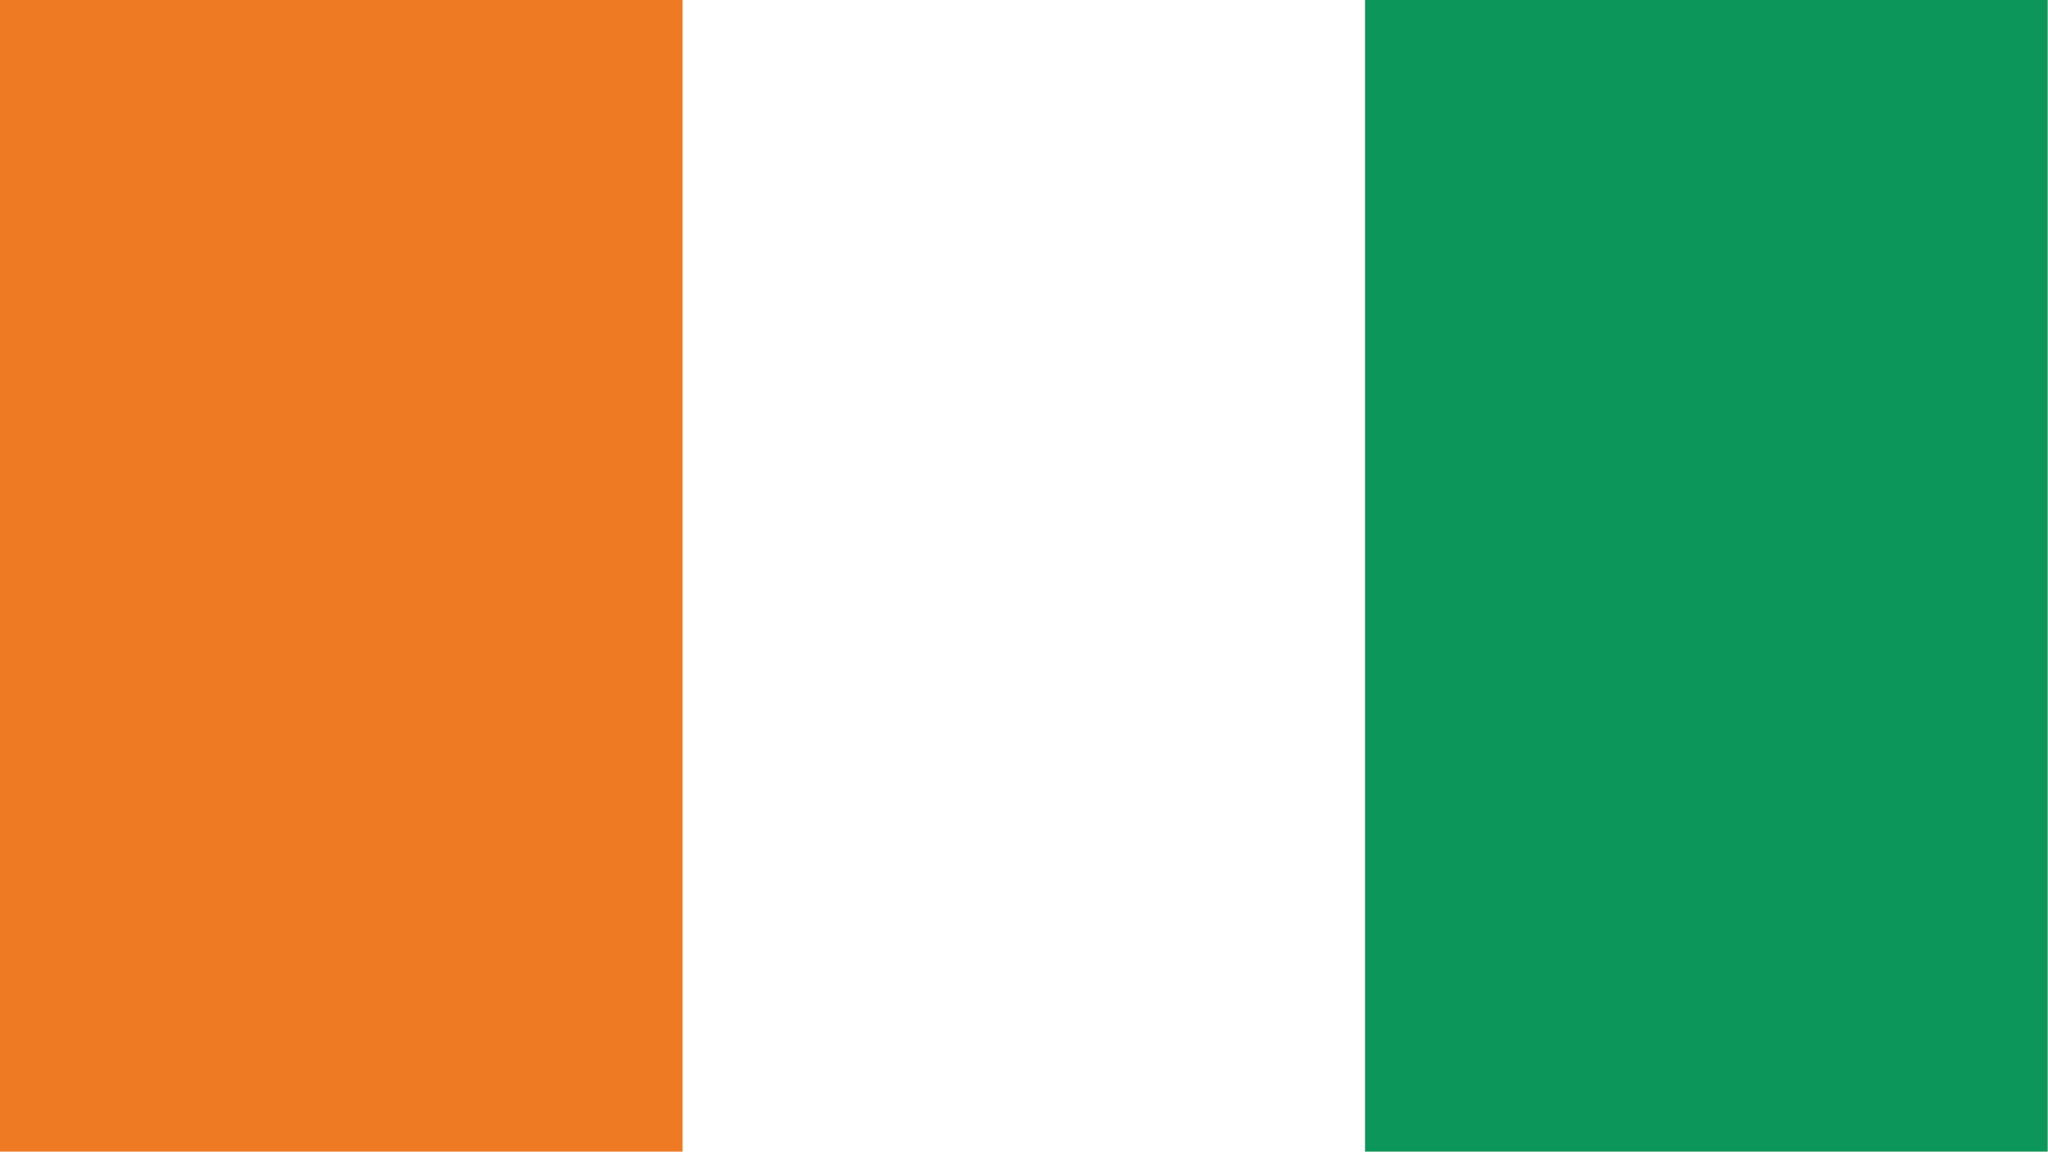 Flag of Côte d'Ivoire. Contains three equal vertical bands of orange (hoist side), white, and green.